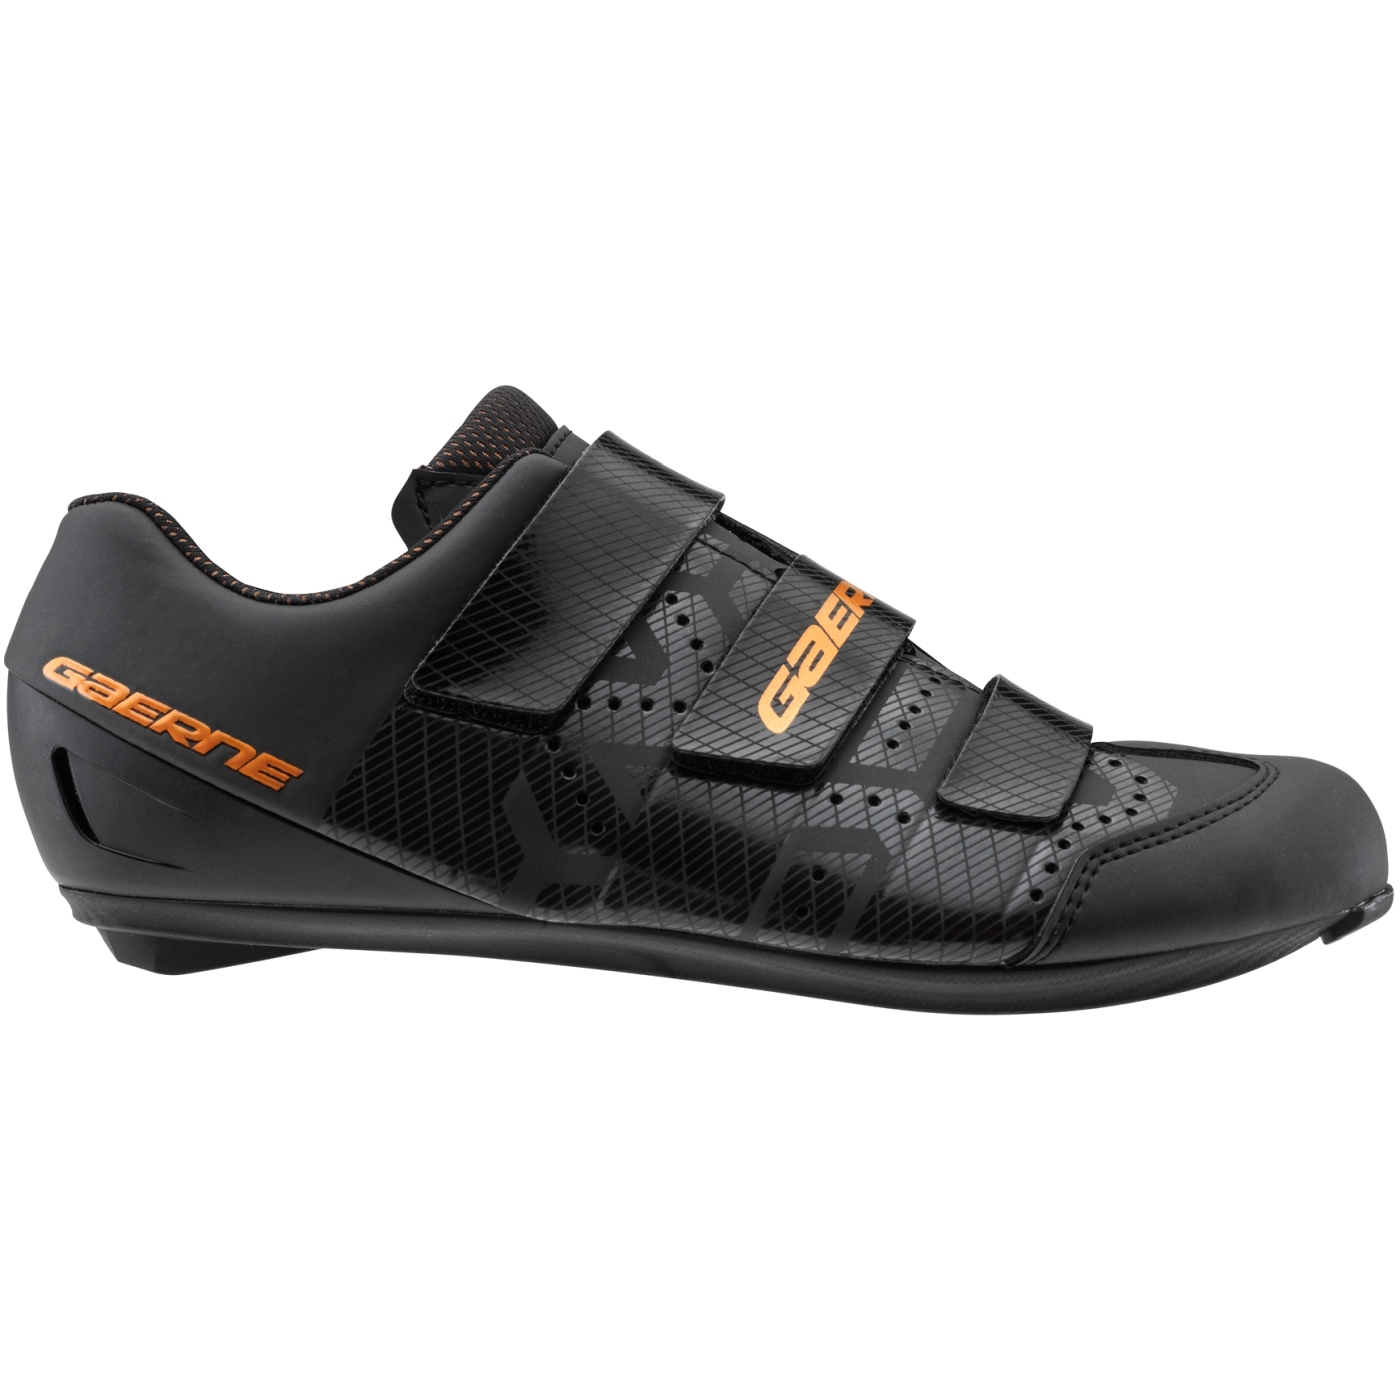 Picture of Gaerne G.Record Road Shoes Women - Matt Black